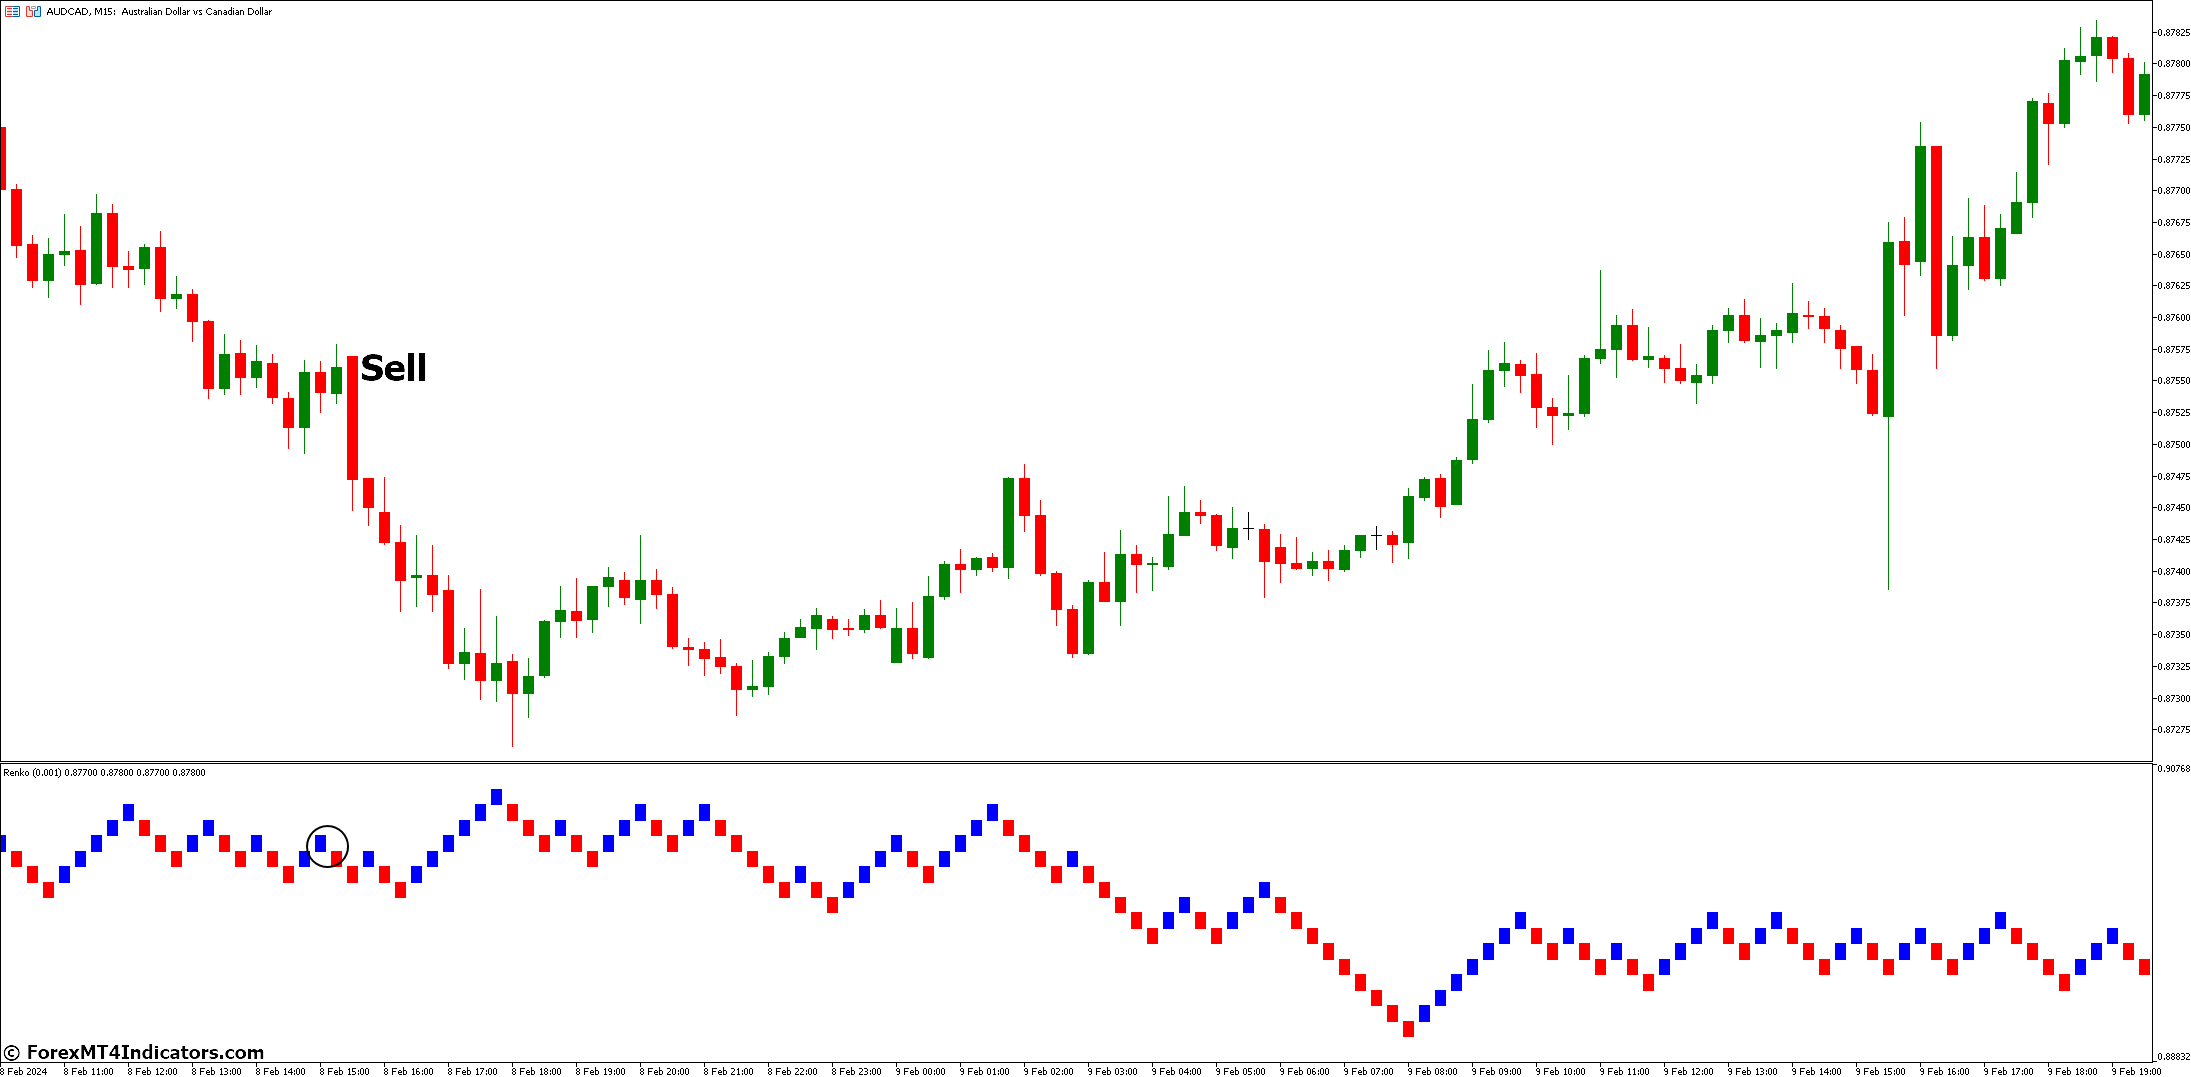 How to Trade with Renko Indicator - Sell Entry